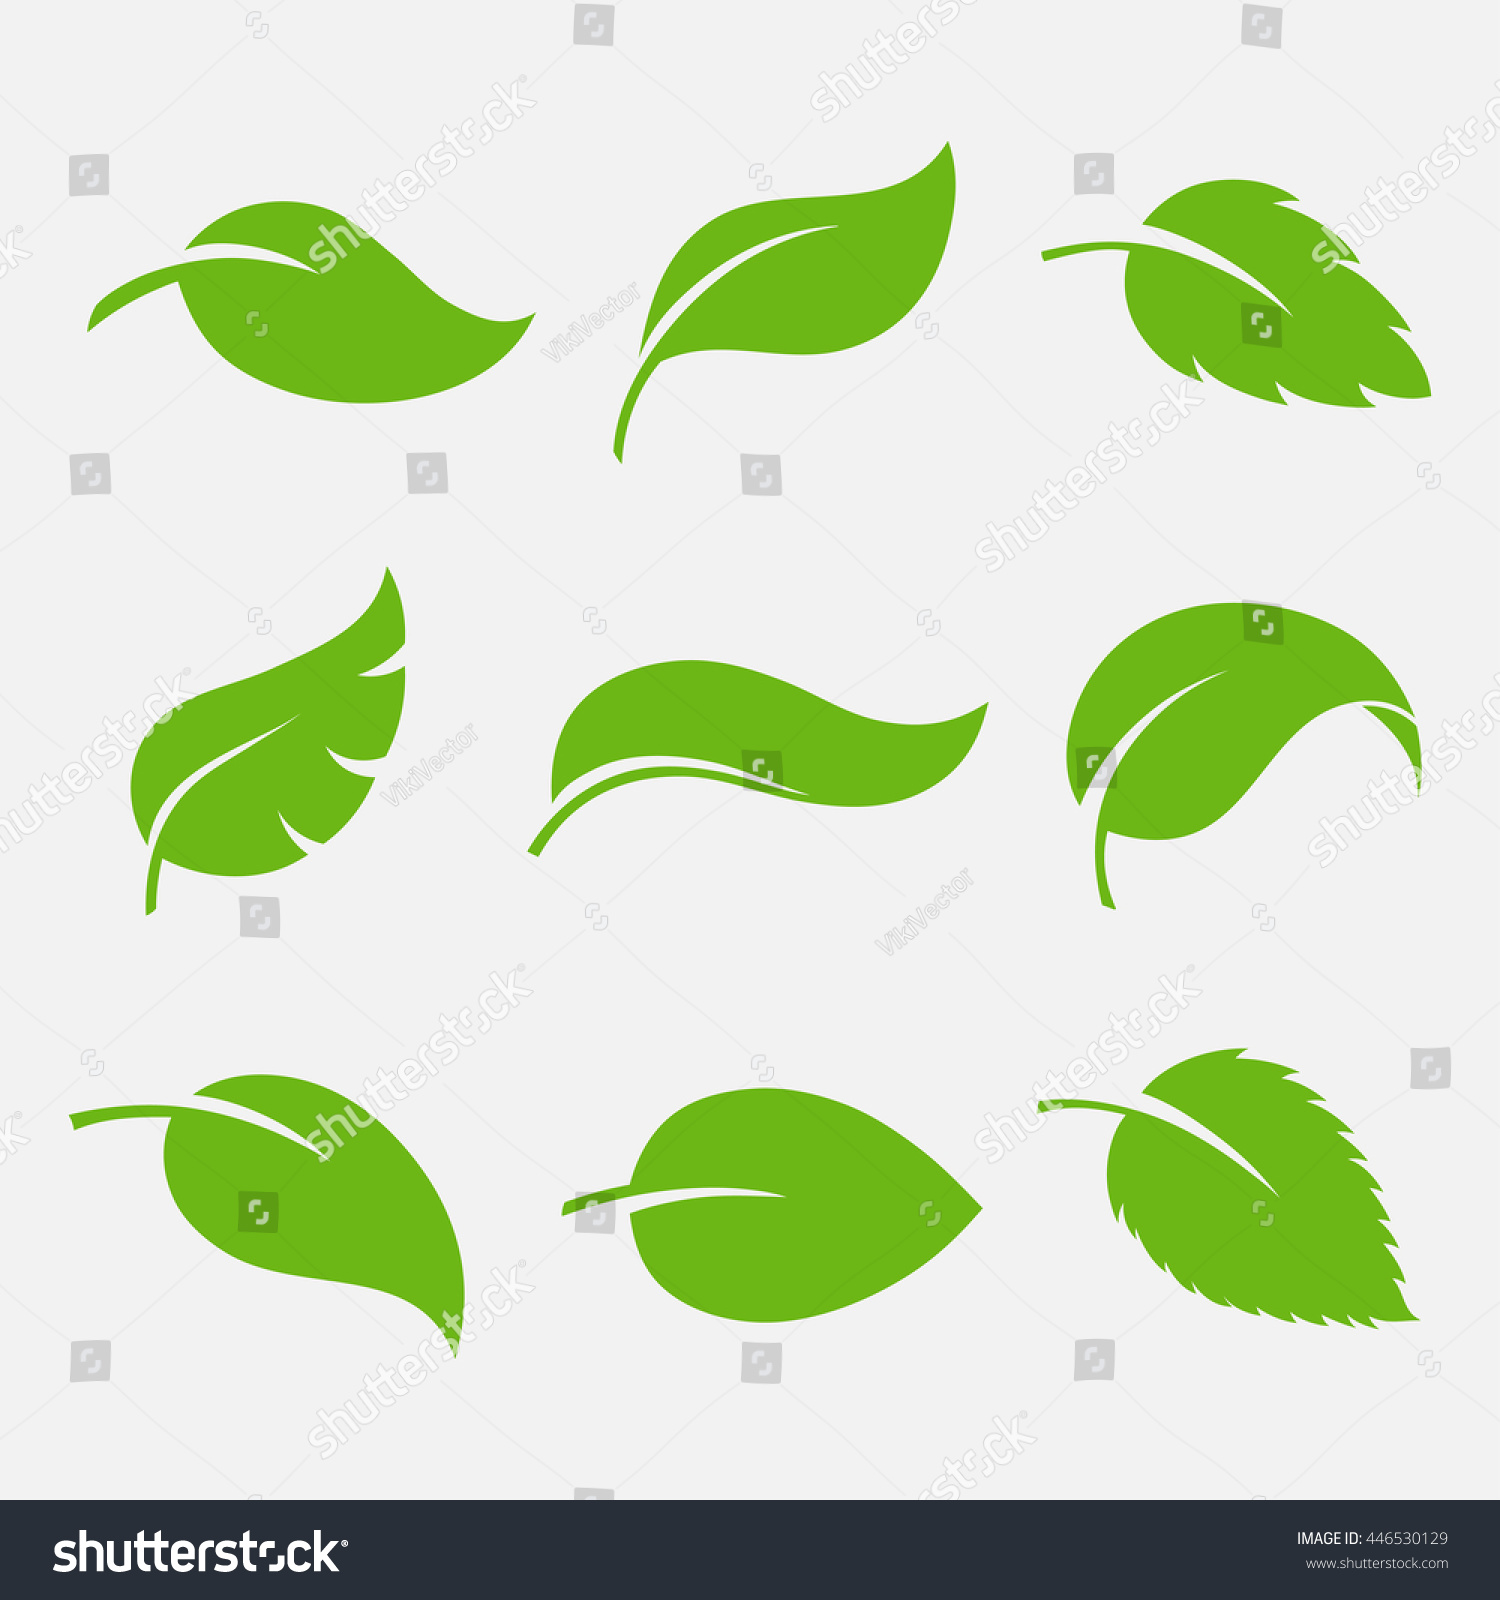 SVG of Leaves icon vector set isolated on white background. Various shapes of green leaves of trees and plants. Elements for eco and bio logos.  svg